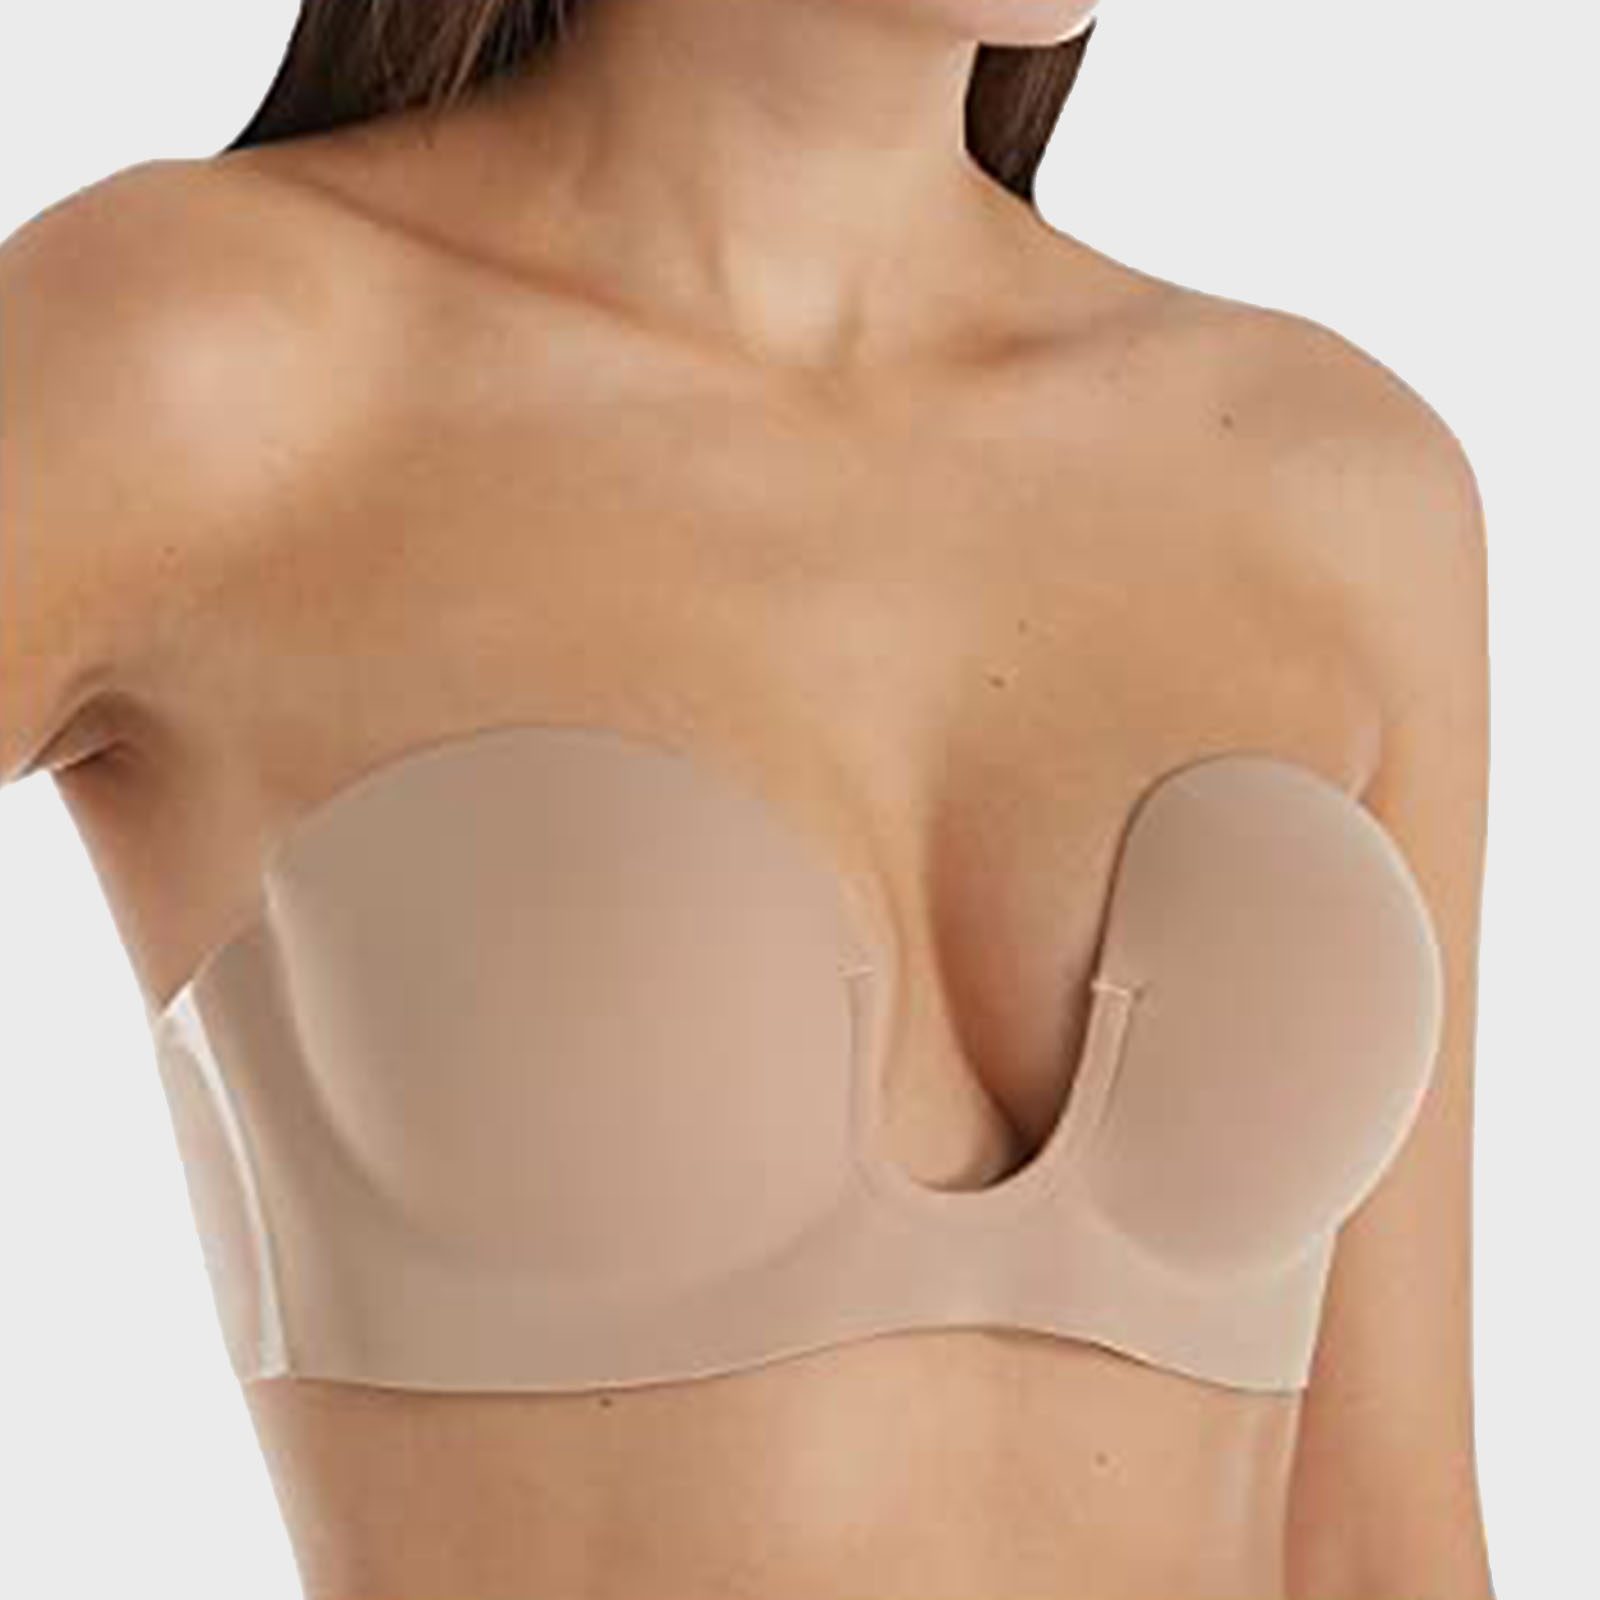 5 Difficult Dress Types and The Best Bras for Each, basque, convertible,  elomi maria and more